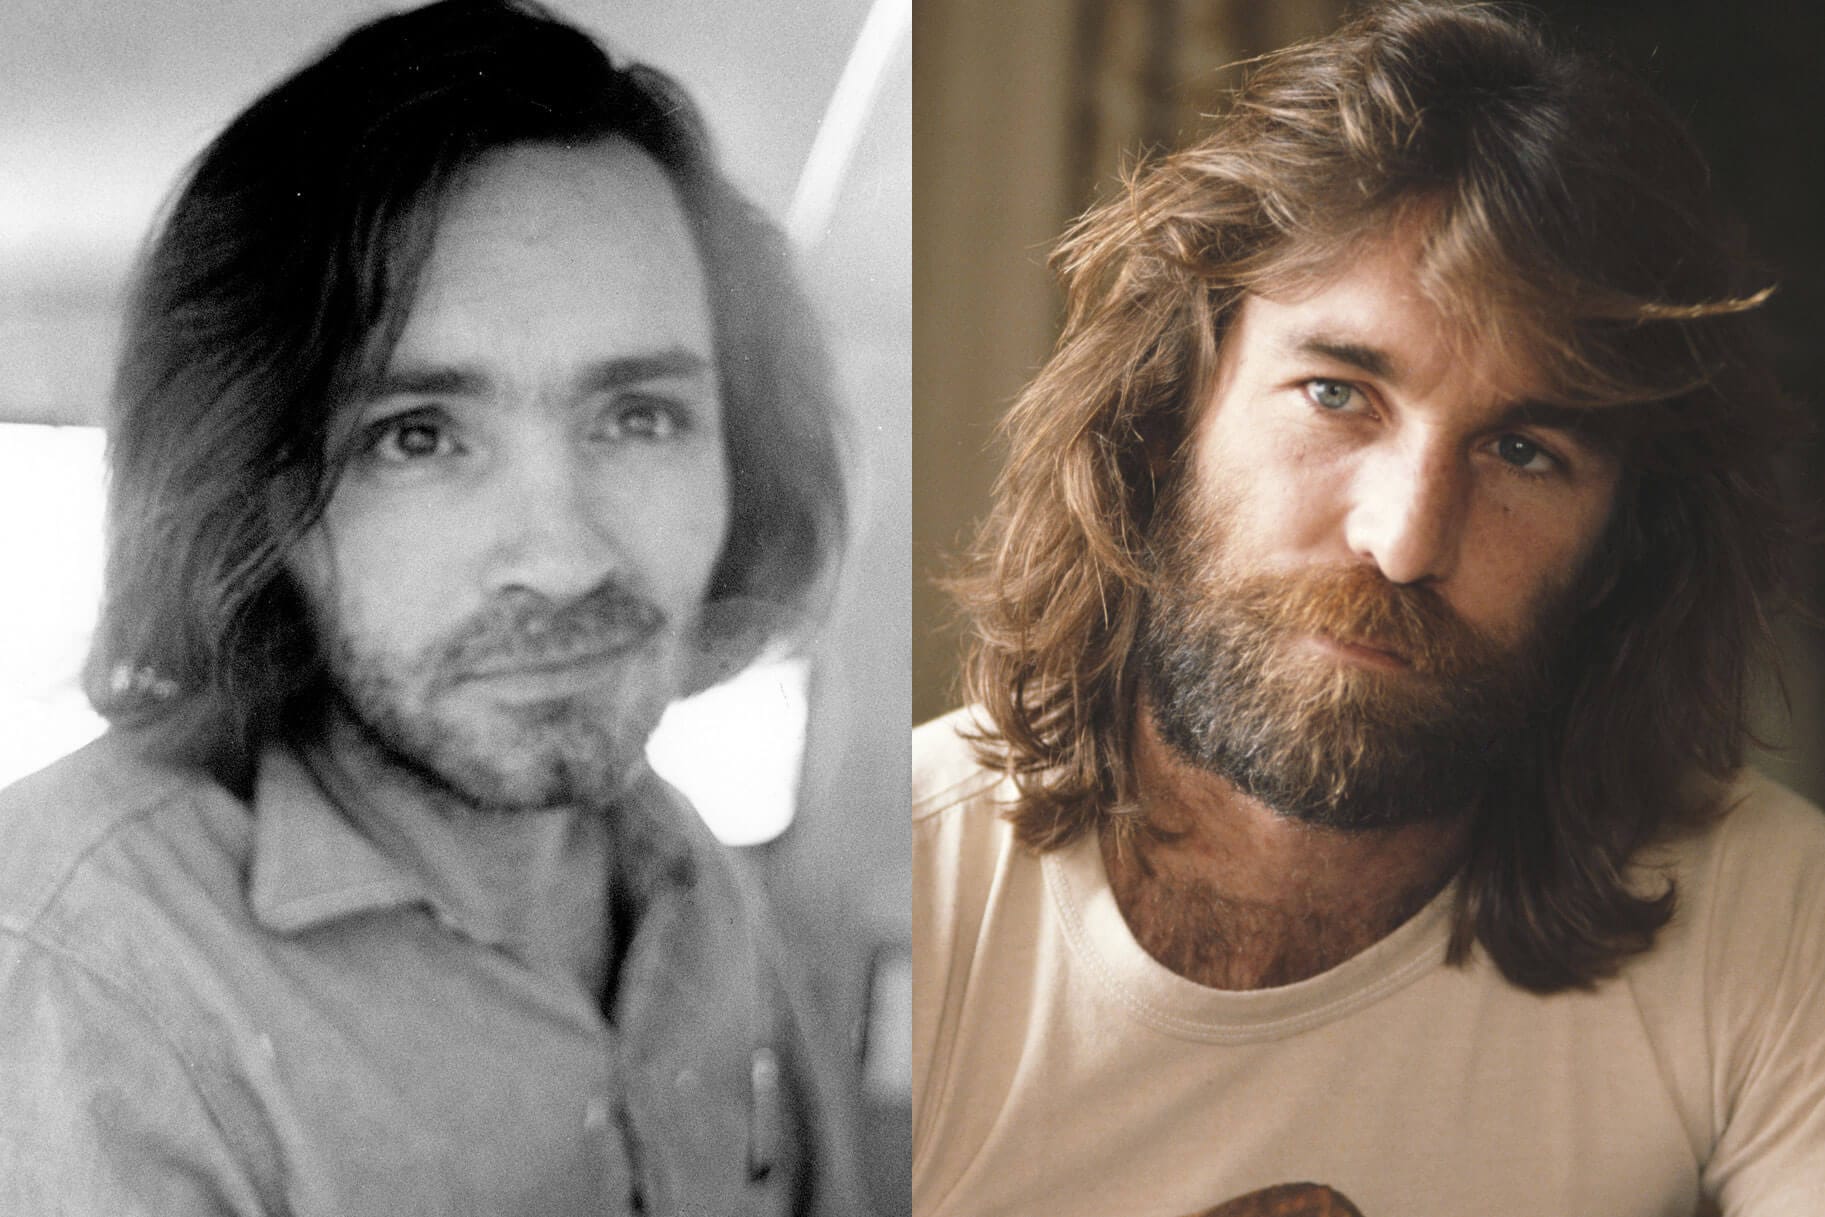 Is charles manson still alive Charles Manson's illness and death were shrouded in mystery